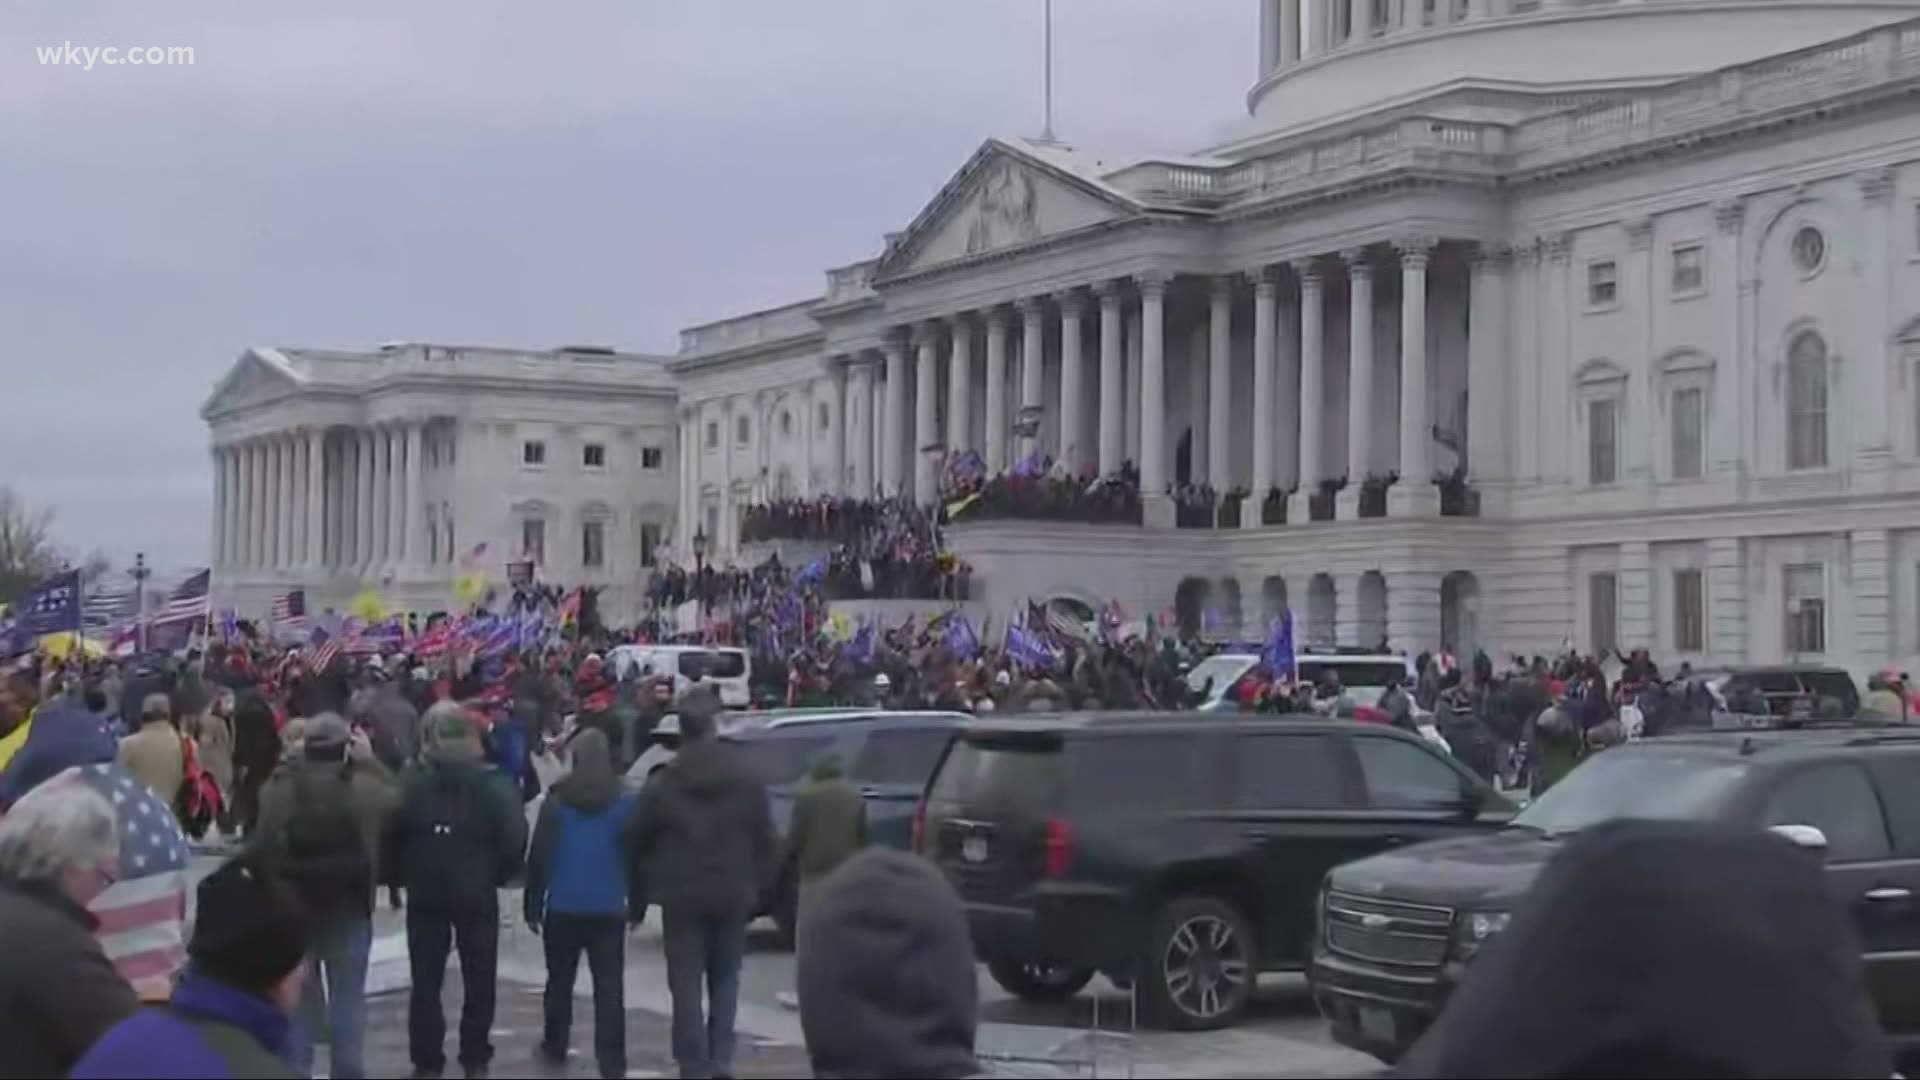 Many political leaders at or near the Capitol building were impacted by the attacks, including some with ties to Northeast Ohio. Mark Naymik reports.